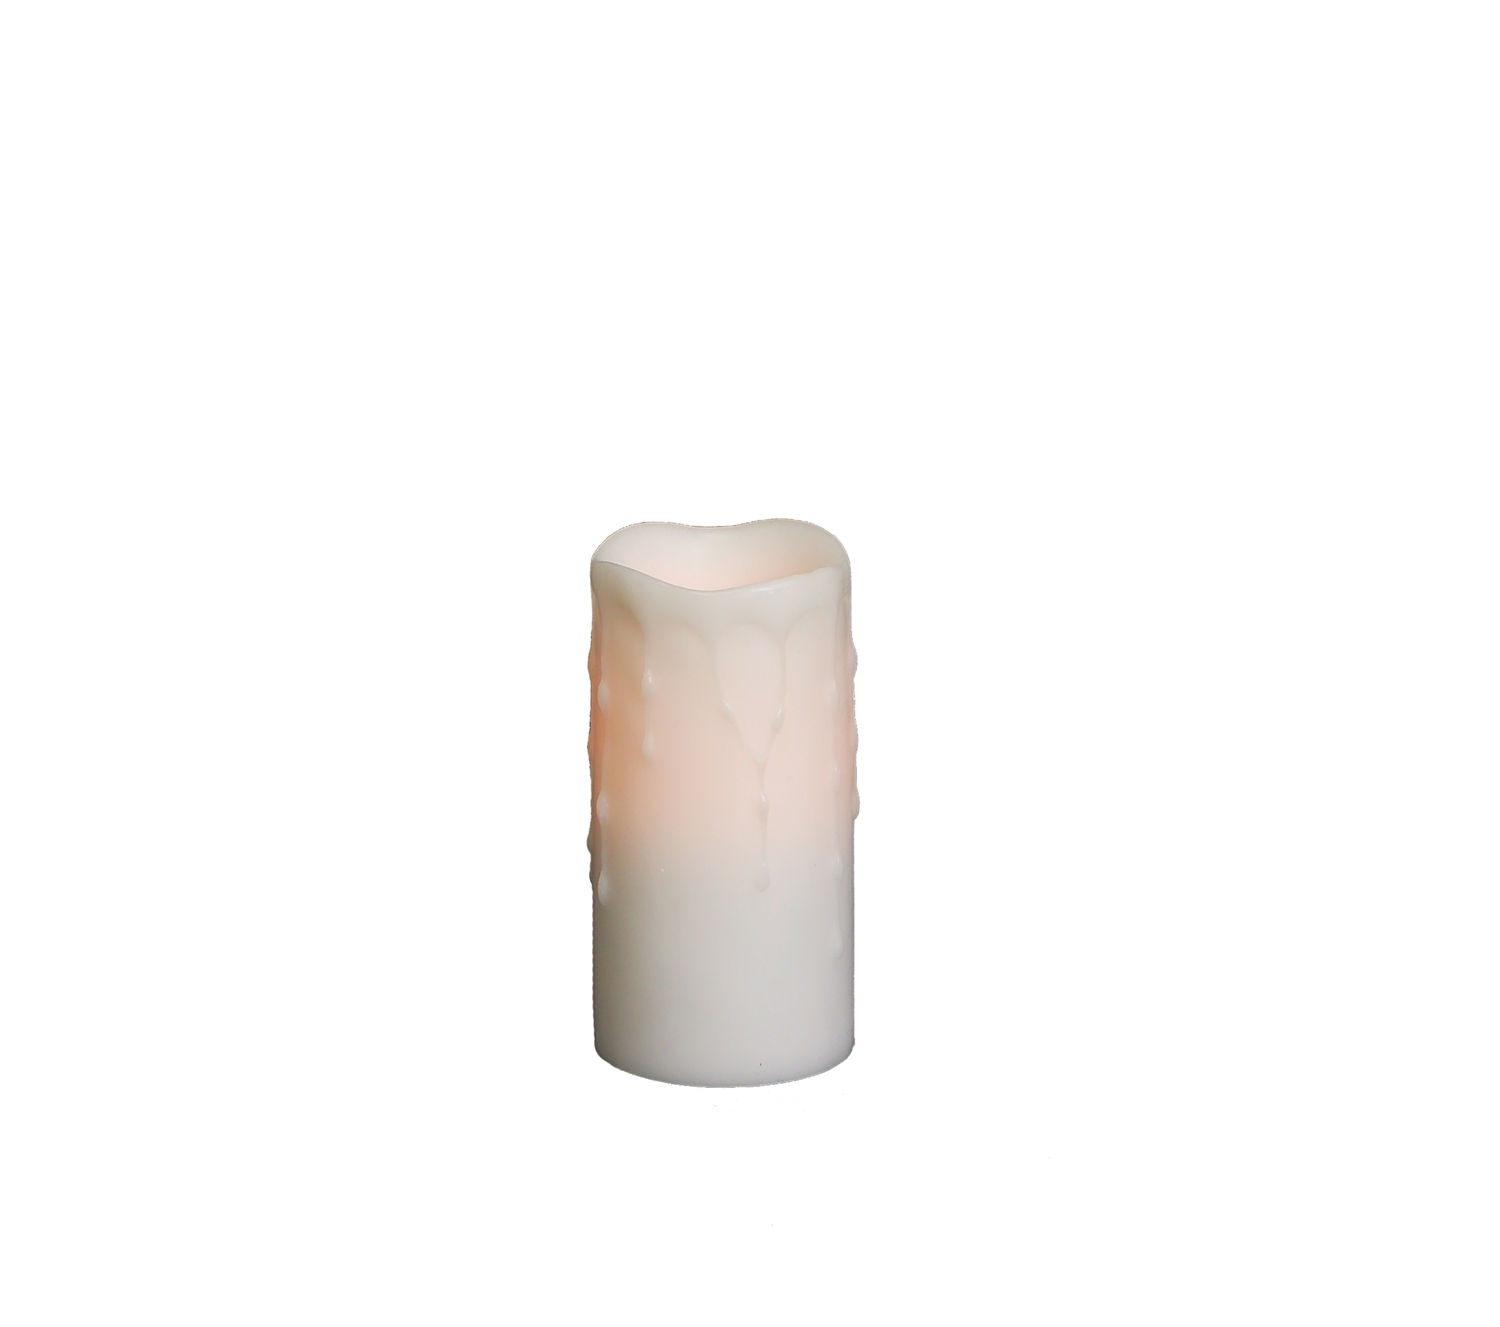 LED Wax Dripping Pillar Candle (Set of 4) 3"Dx6"H Wax/Plastic - 2 C Batteries Not Incld.